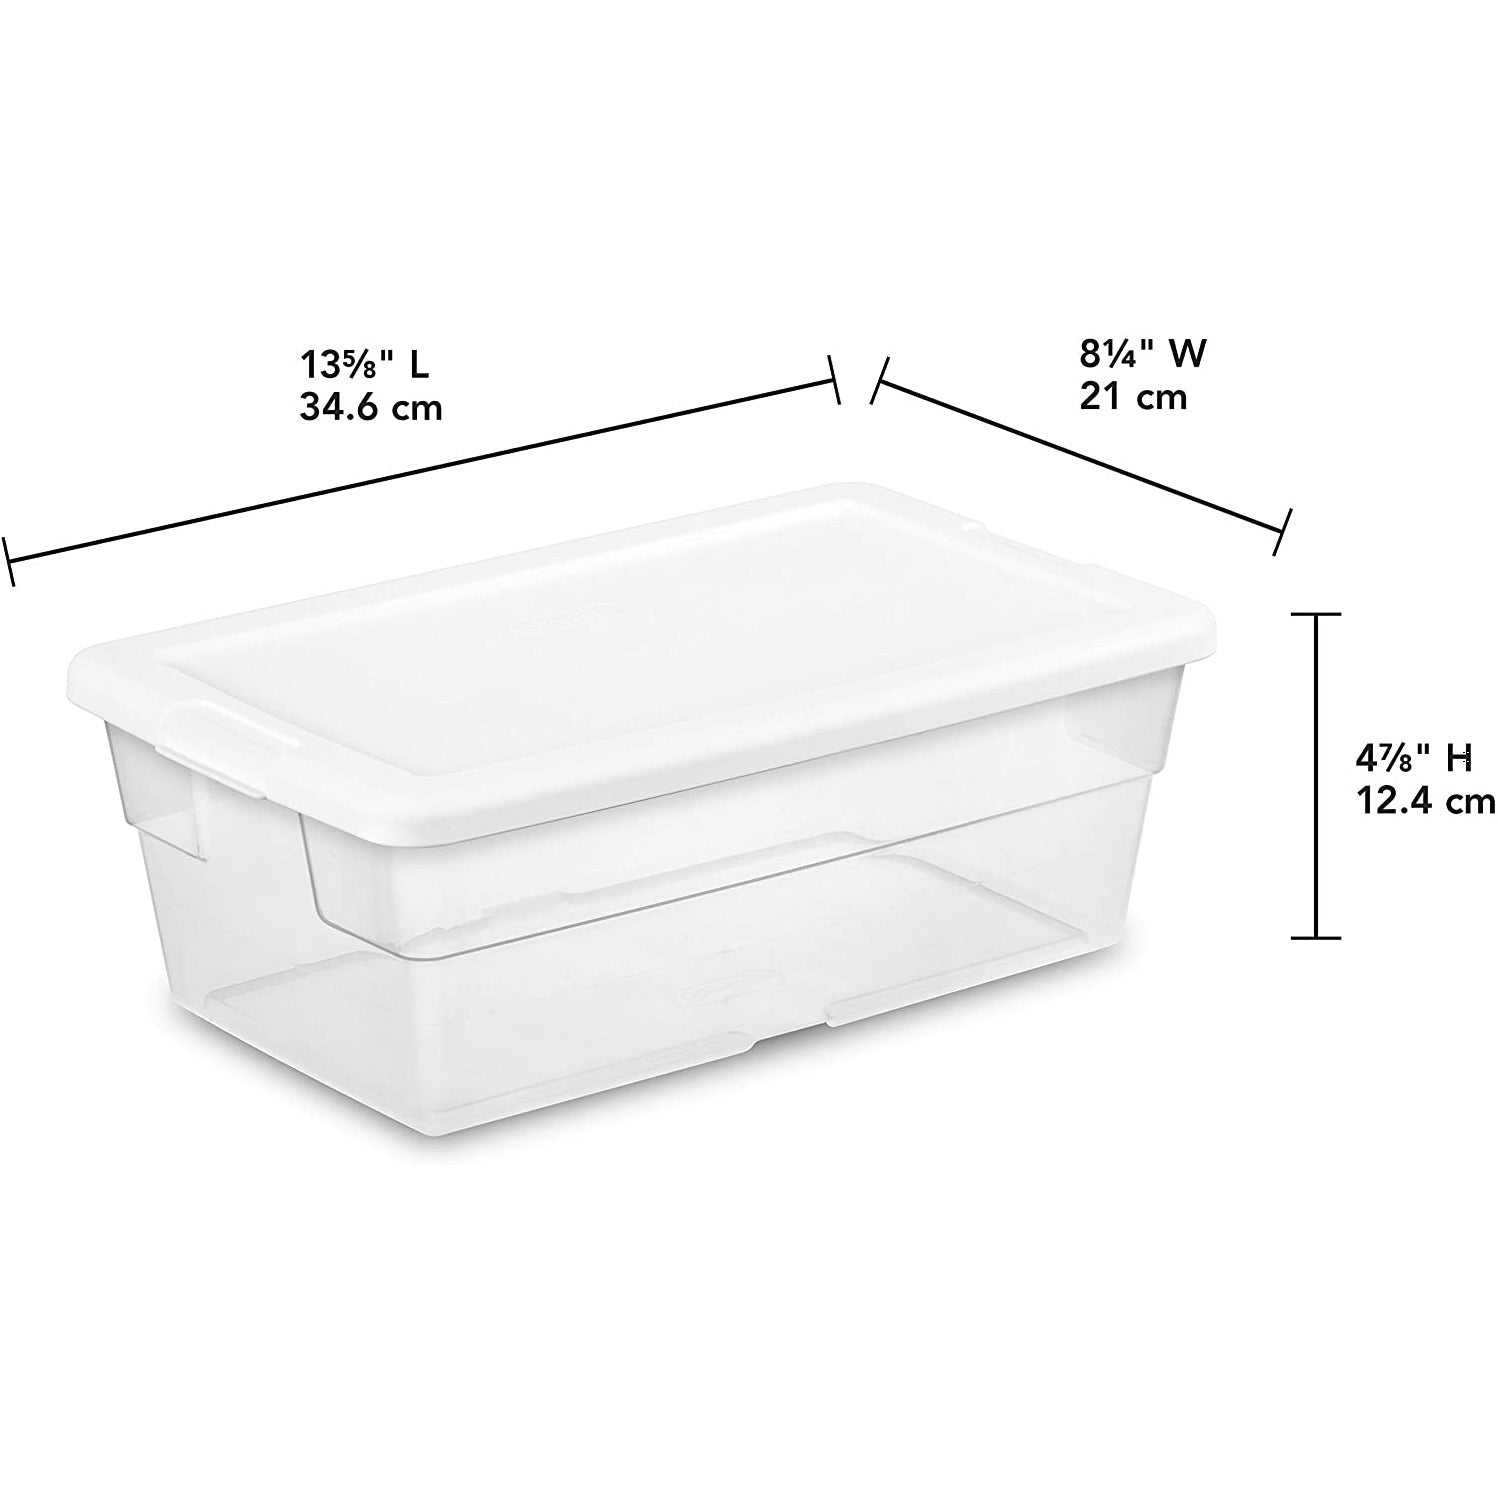 6 Wholesale Home Basics 30 Liter Plastic Storage Container With Lid, Clear